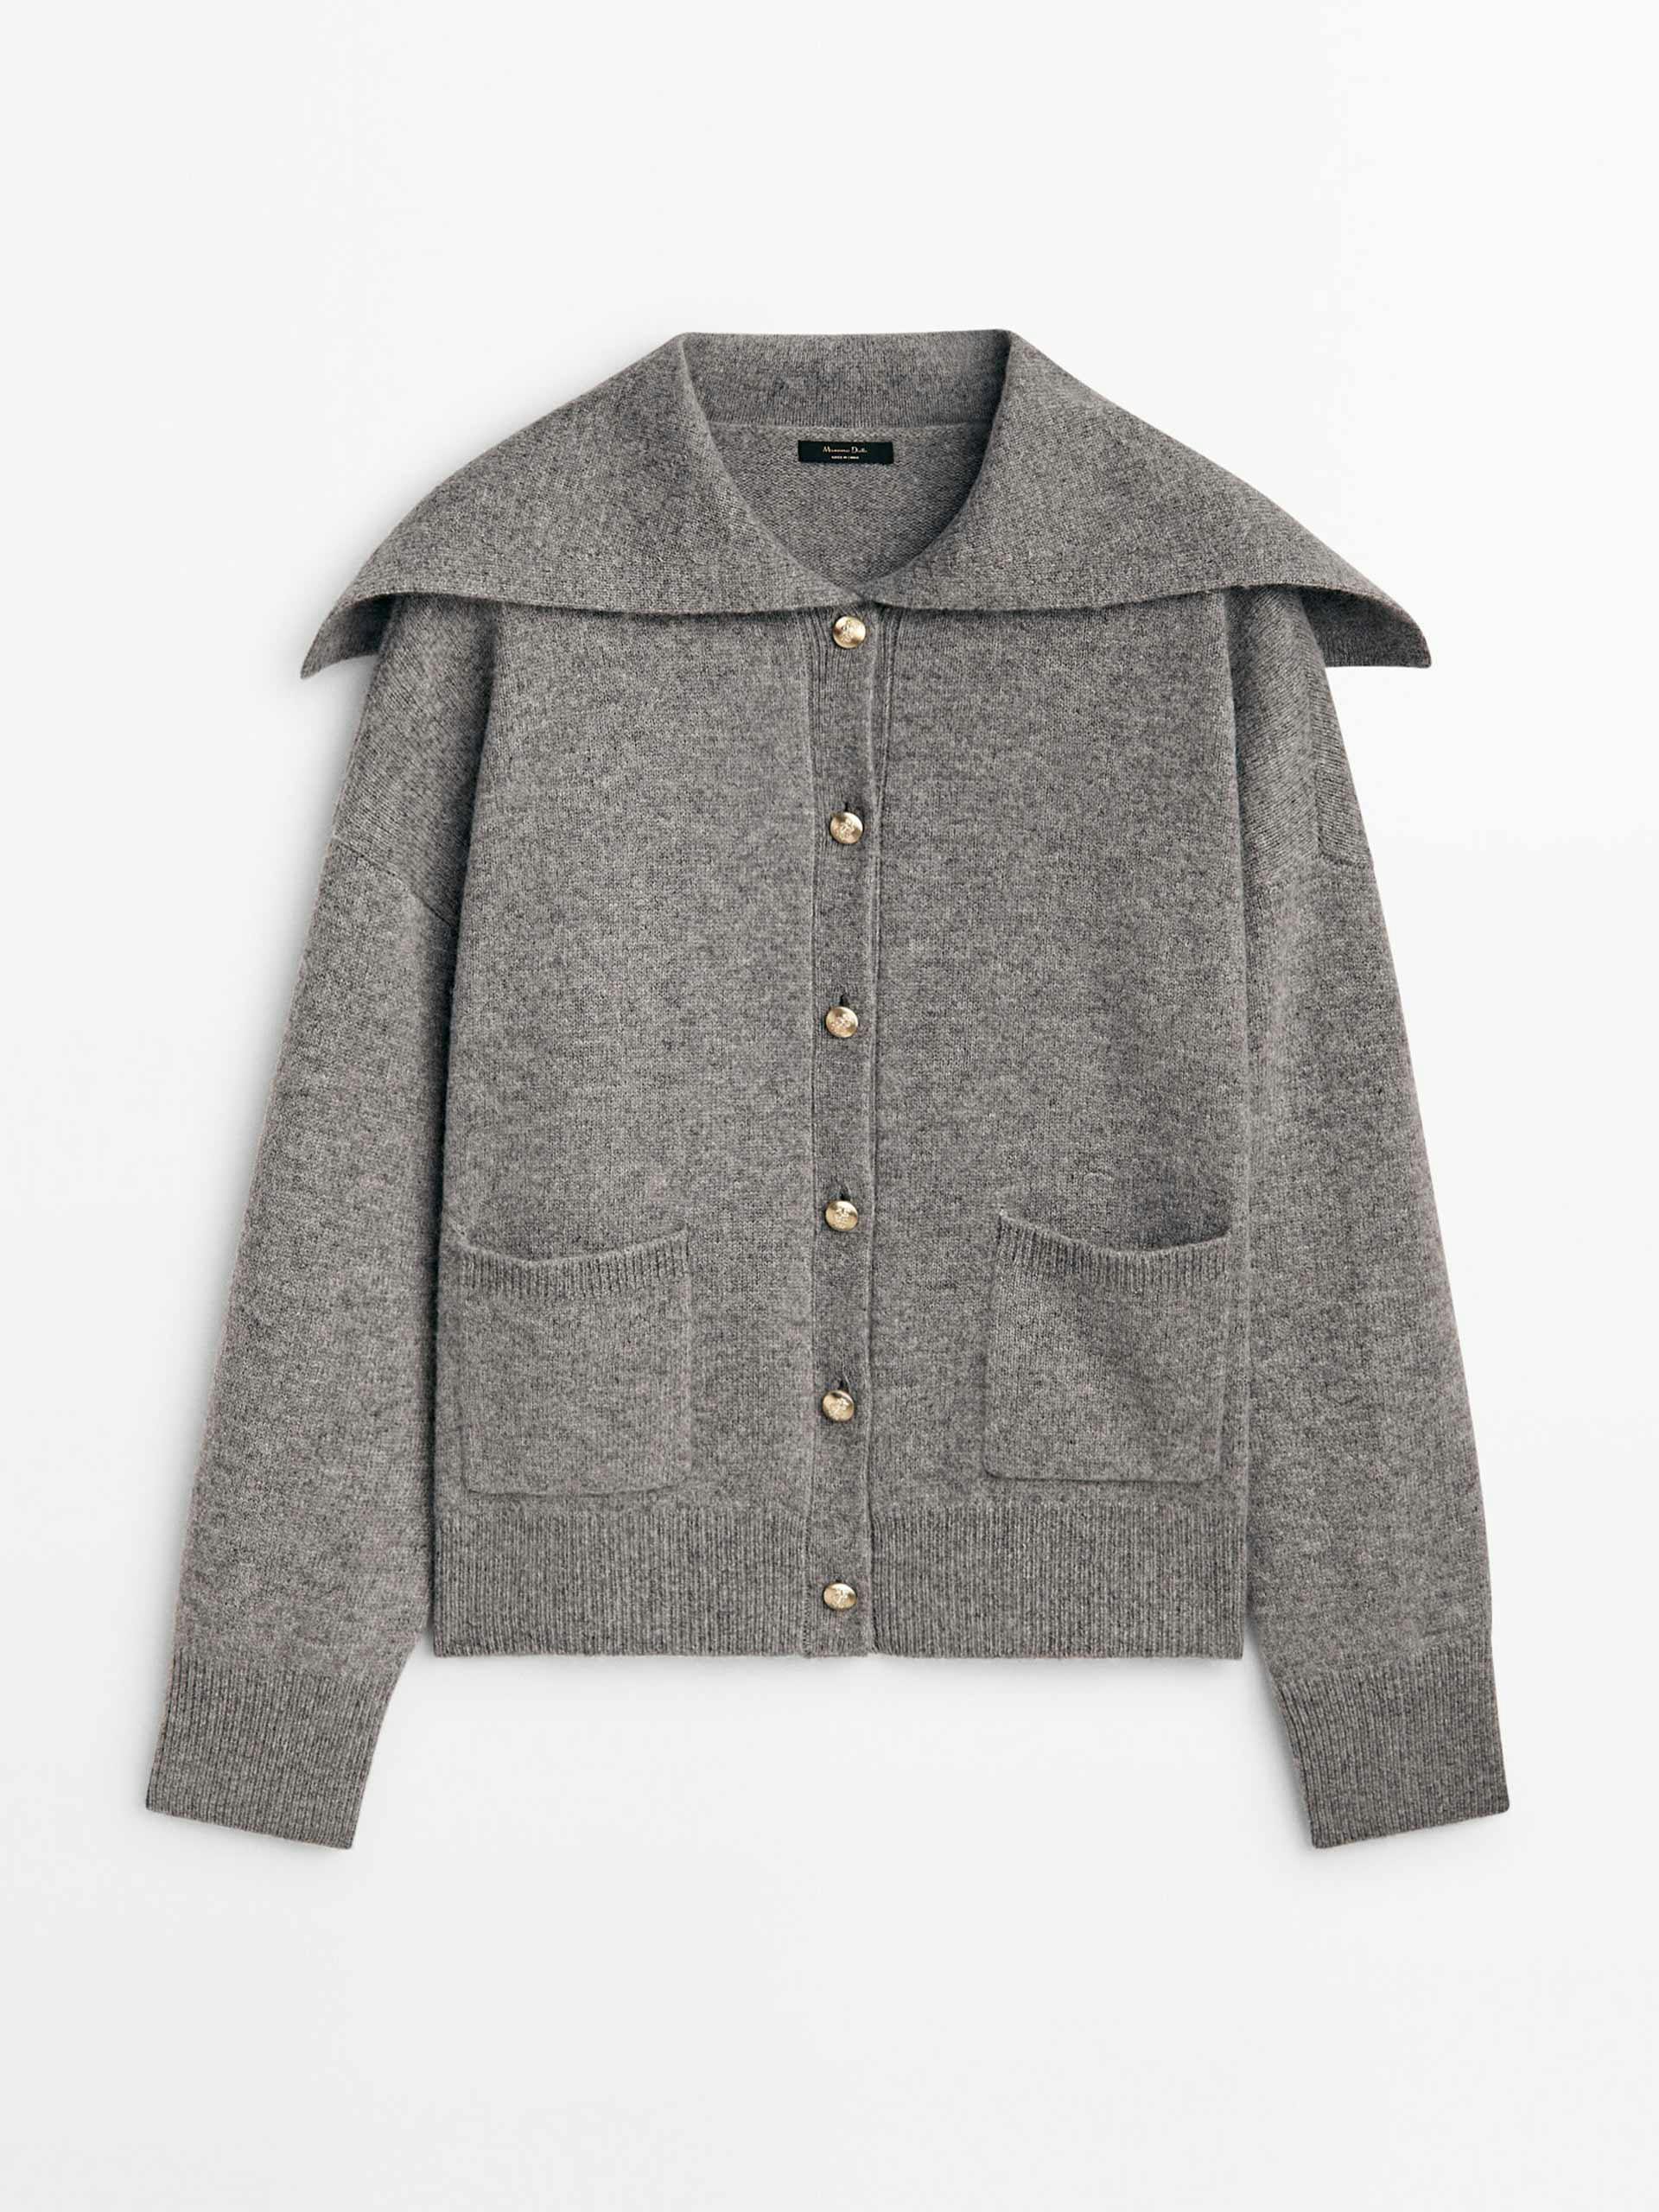 Wool and cashmere blend grey cardigan